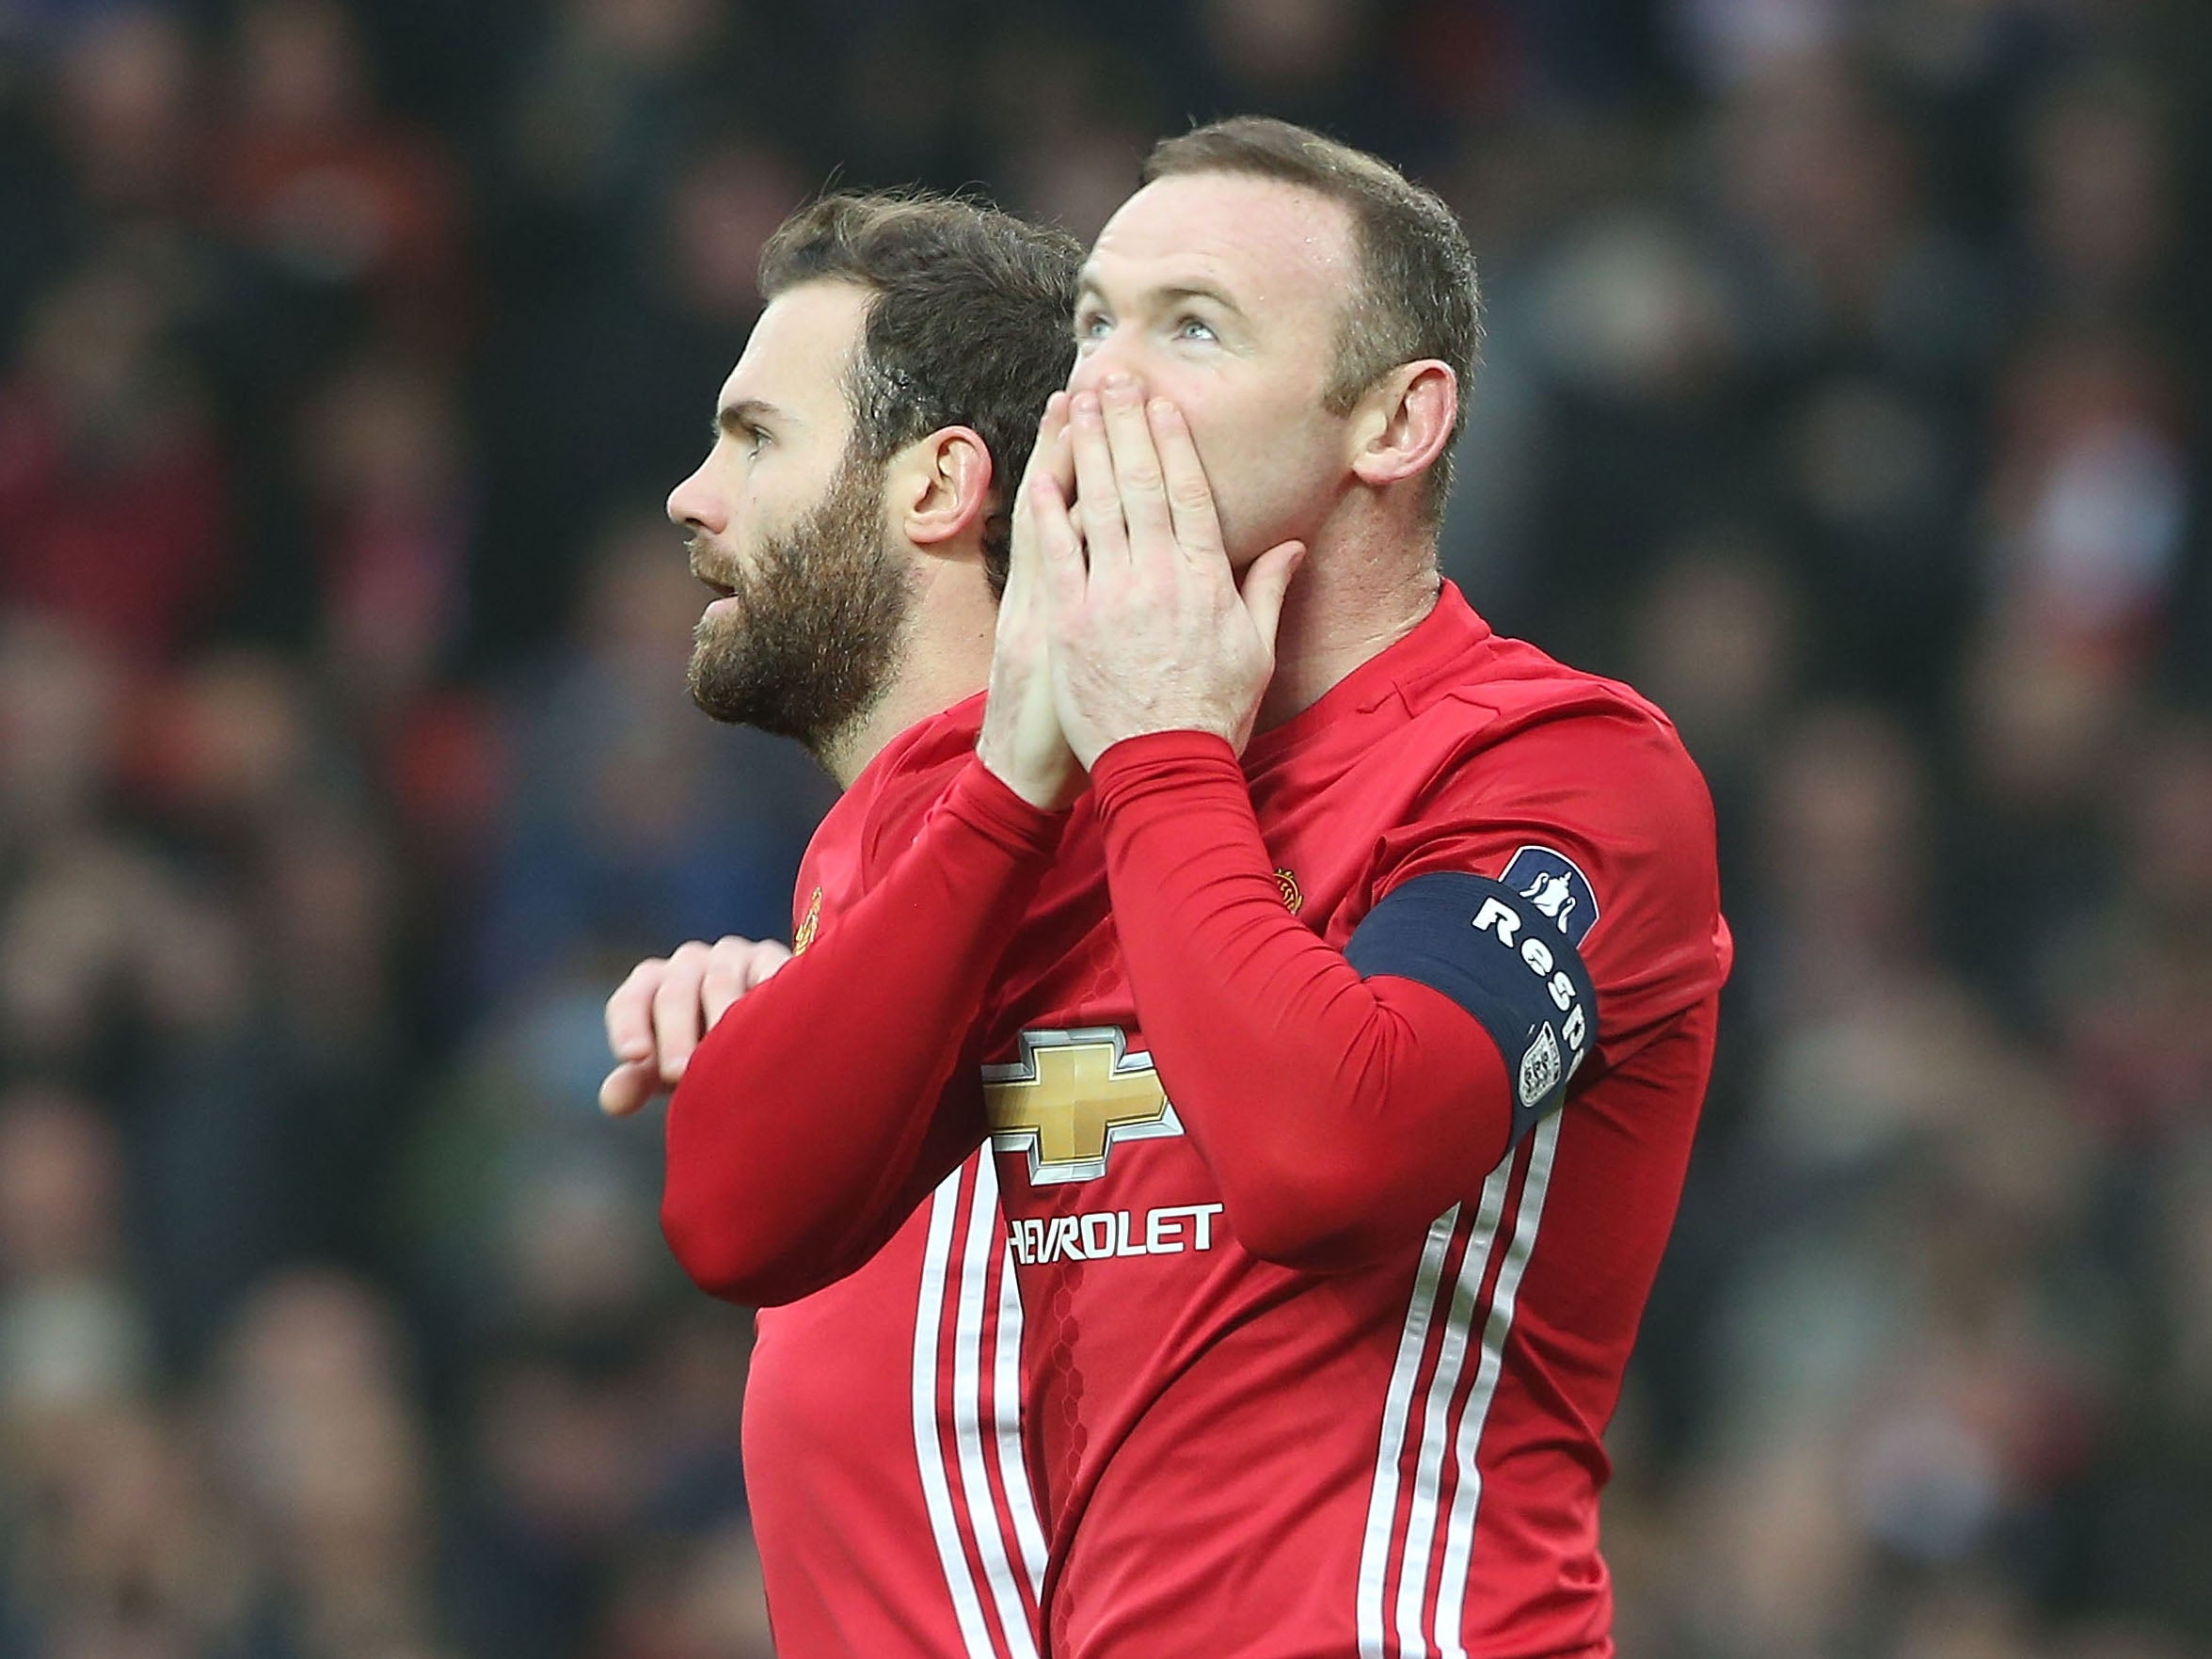 Rooney scored his 249th Manchester United goal in the win over Reading